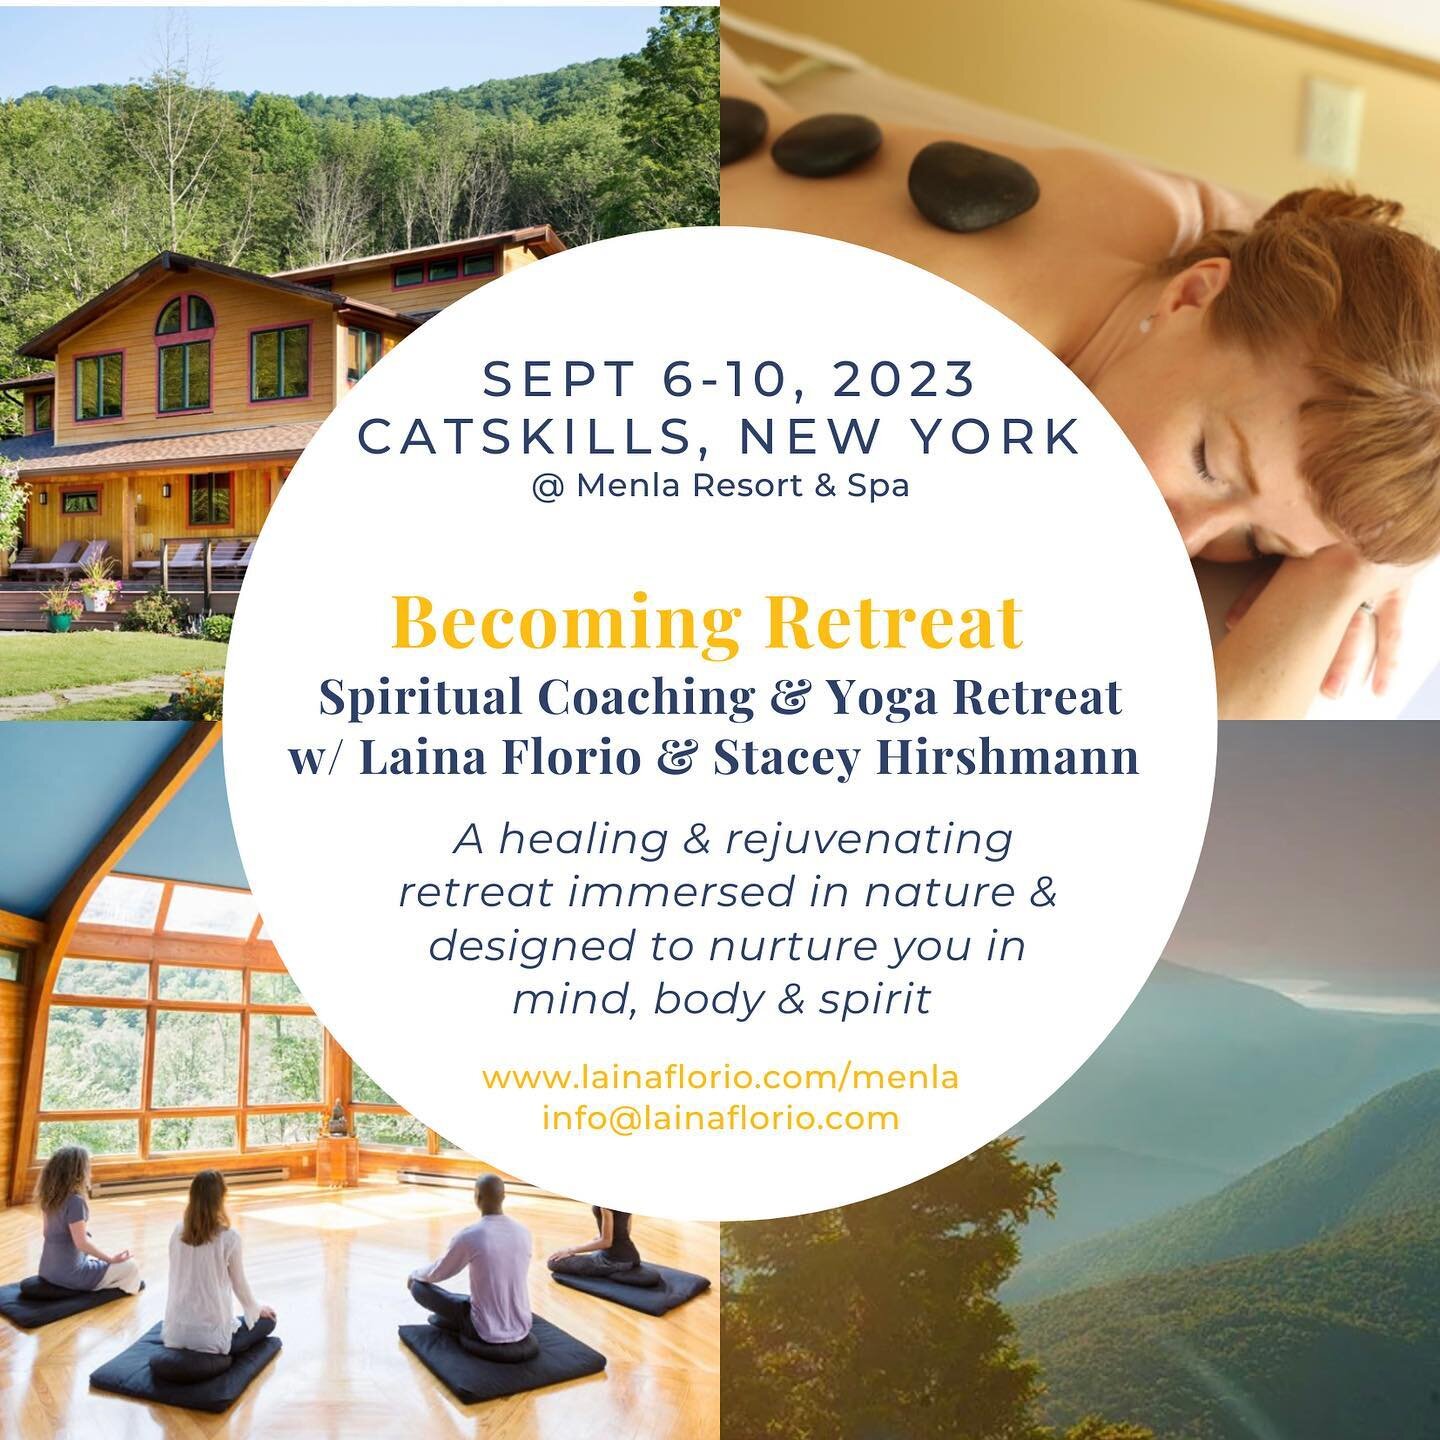 BECOMING Retreat
Holistic Coaching &amp; Yoga
September 6-10th, 2023
Catskills, New York 🇺🇸 

I am beyond thrilled to host this retreat in New York at @menlaretreat , a hidden oasis set in the heart of the Catskill mountains surrounded by thousands